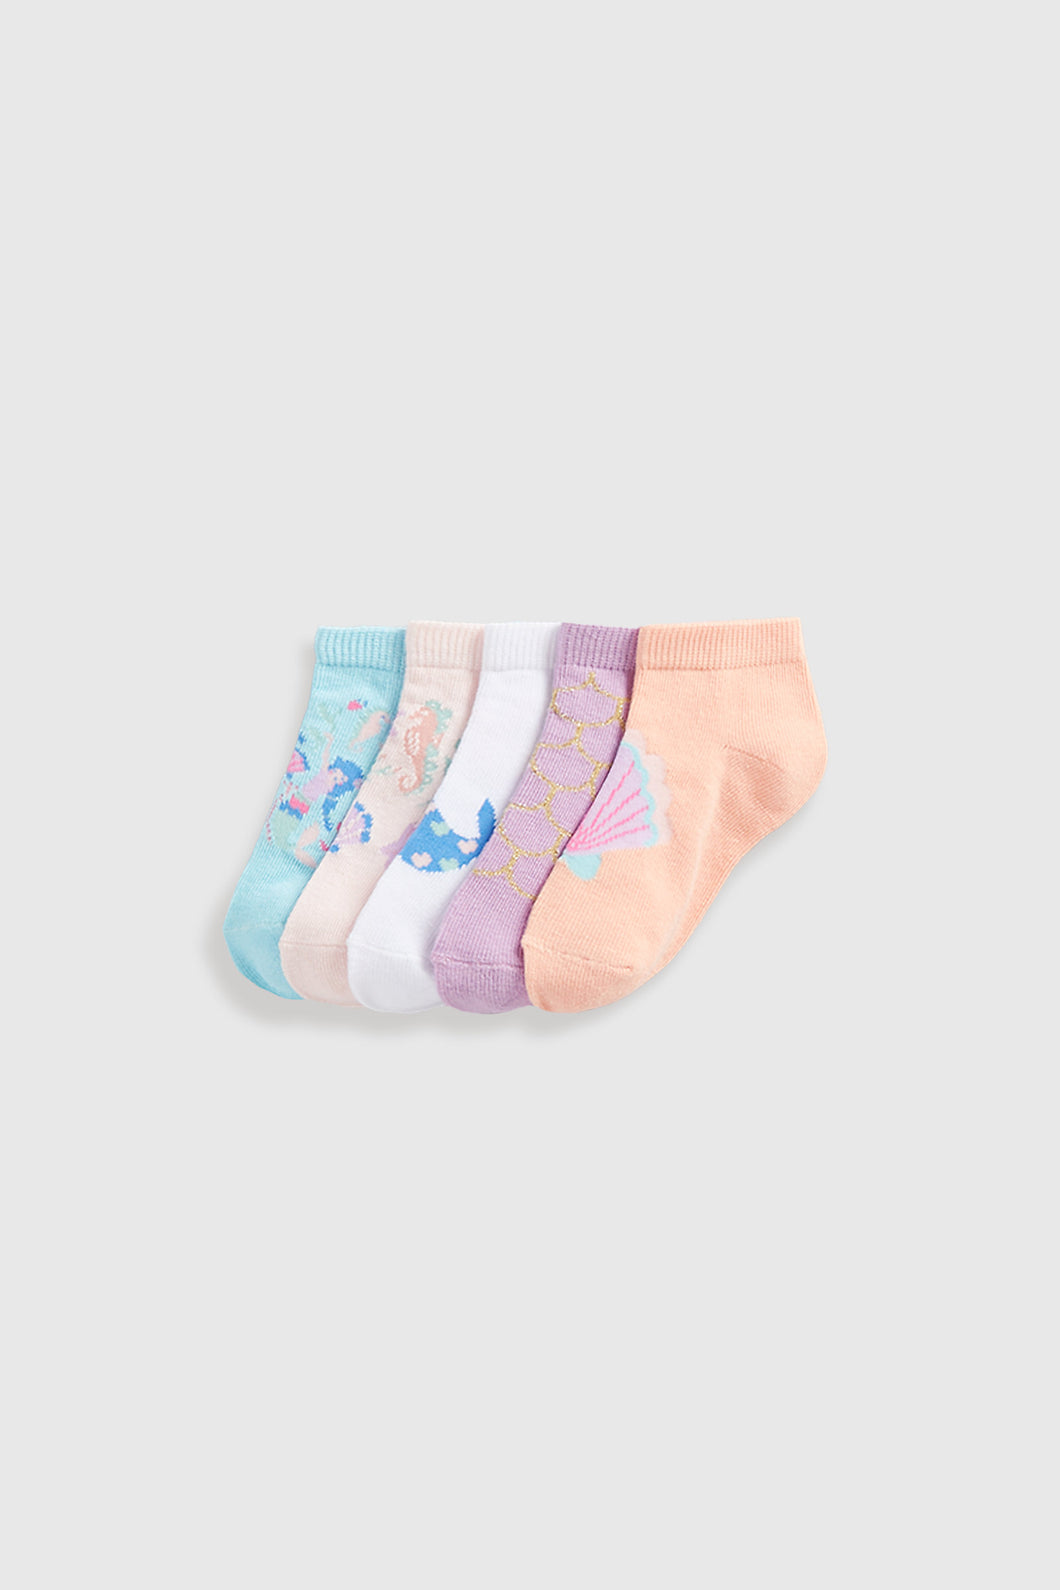 Mothercare Seahorse Trainer Socks - 5 Pack